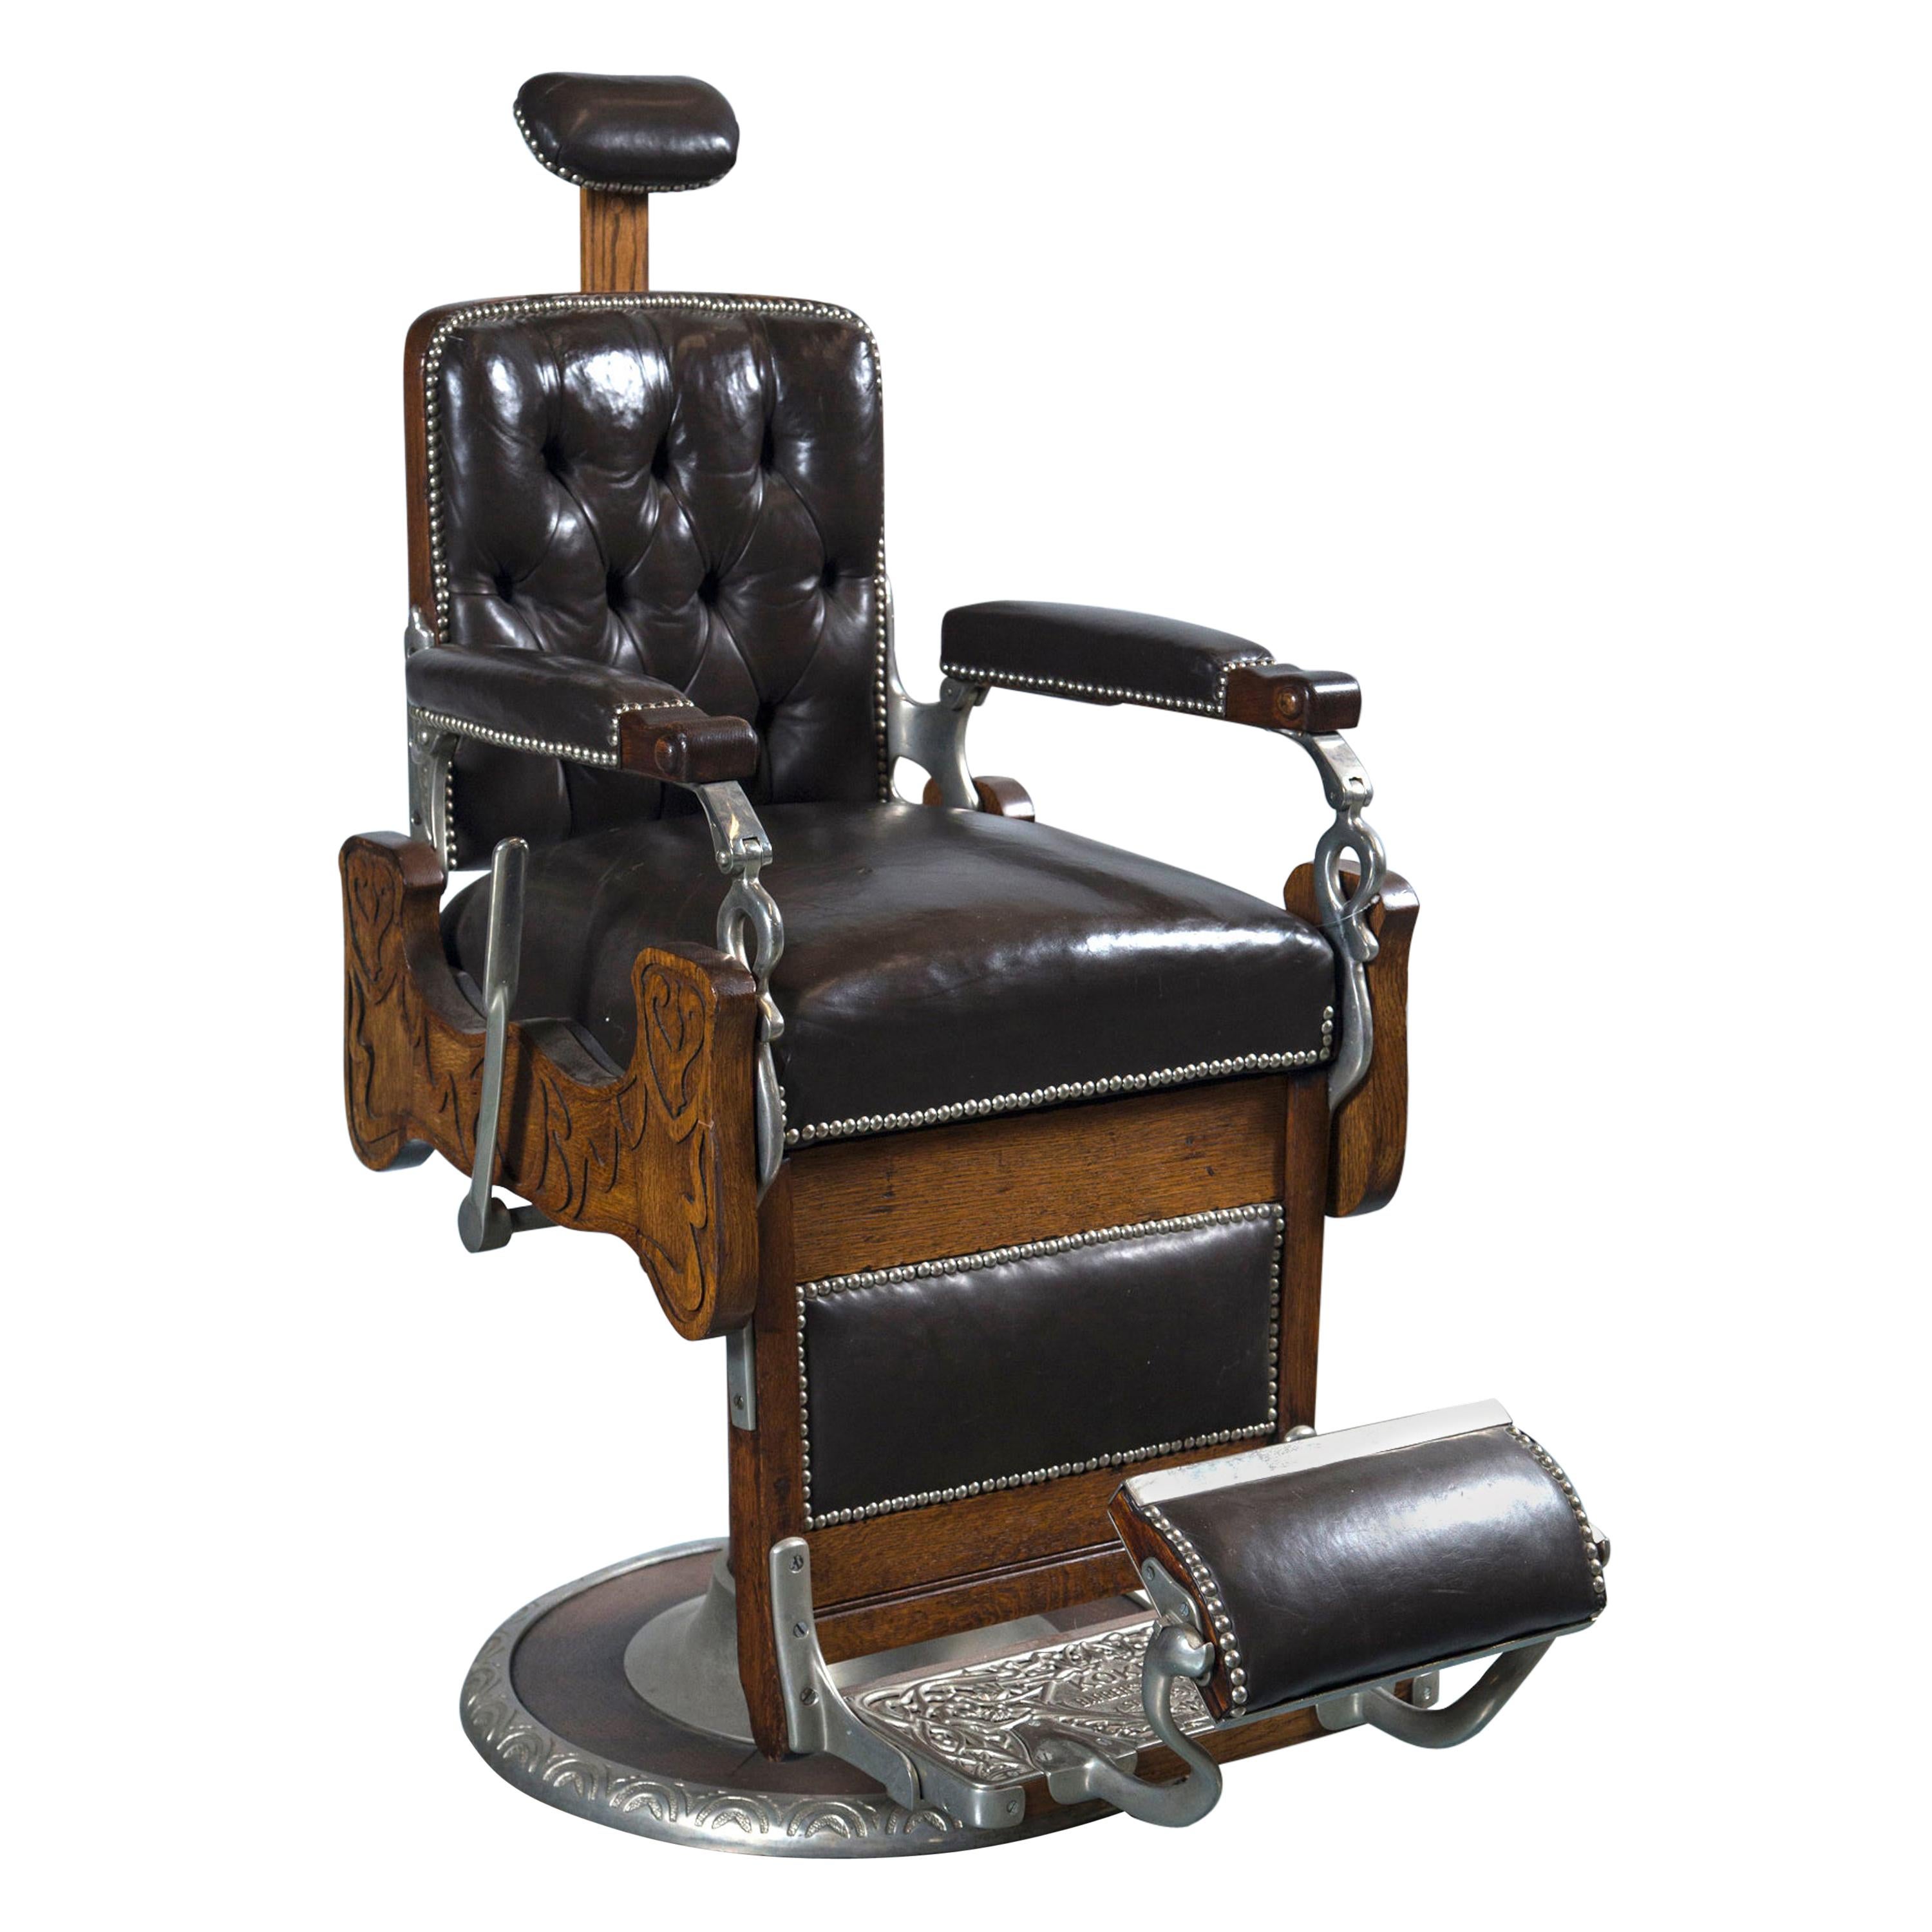 Vintage Koken Barber's Chair 1890 ca signed Koken Barbers' Supply St. Louis, Mo